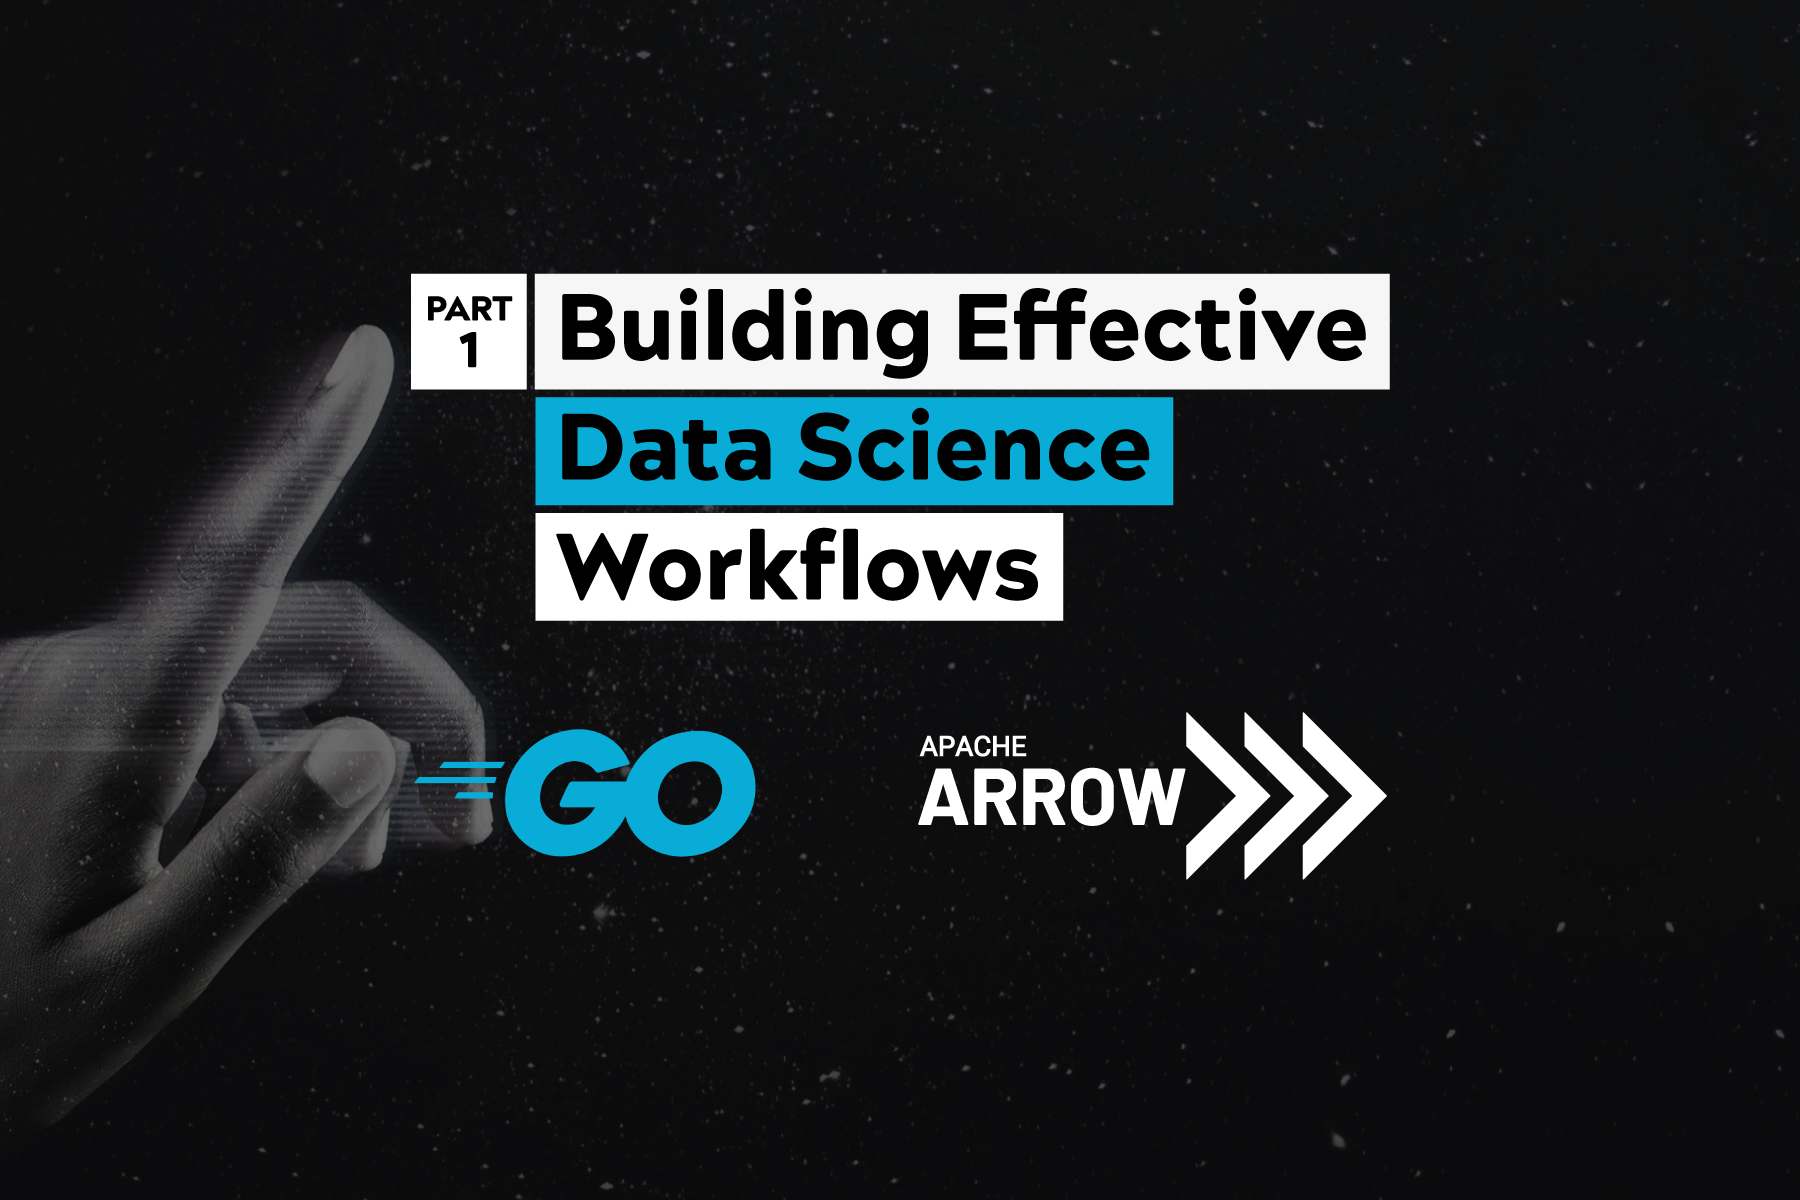 Building Effective Data Science Workflows with Go and Apache Arrow.